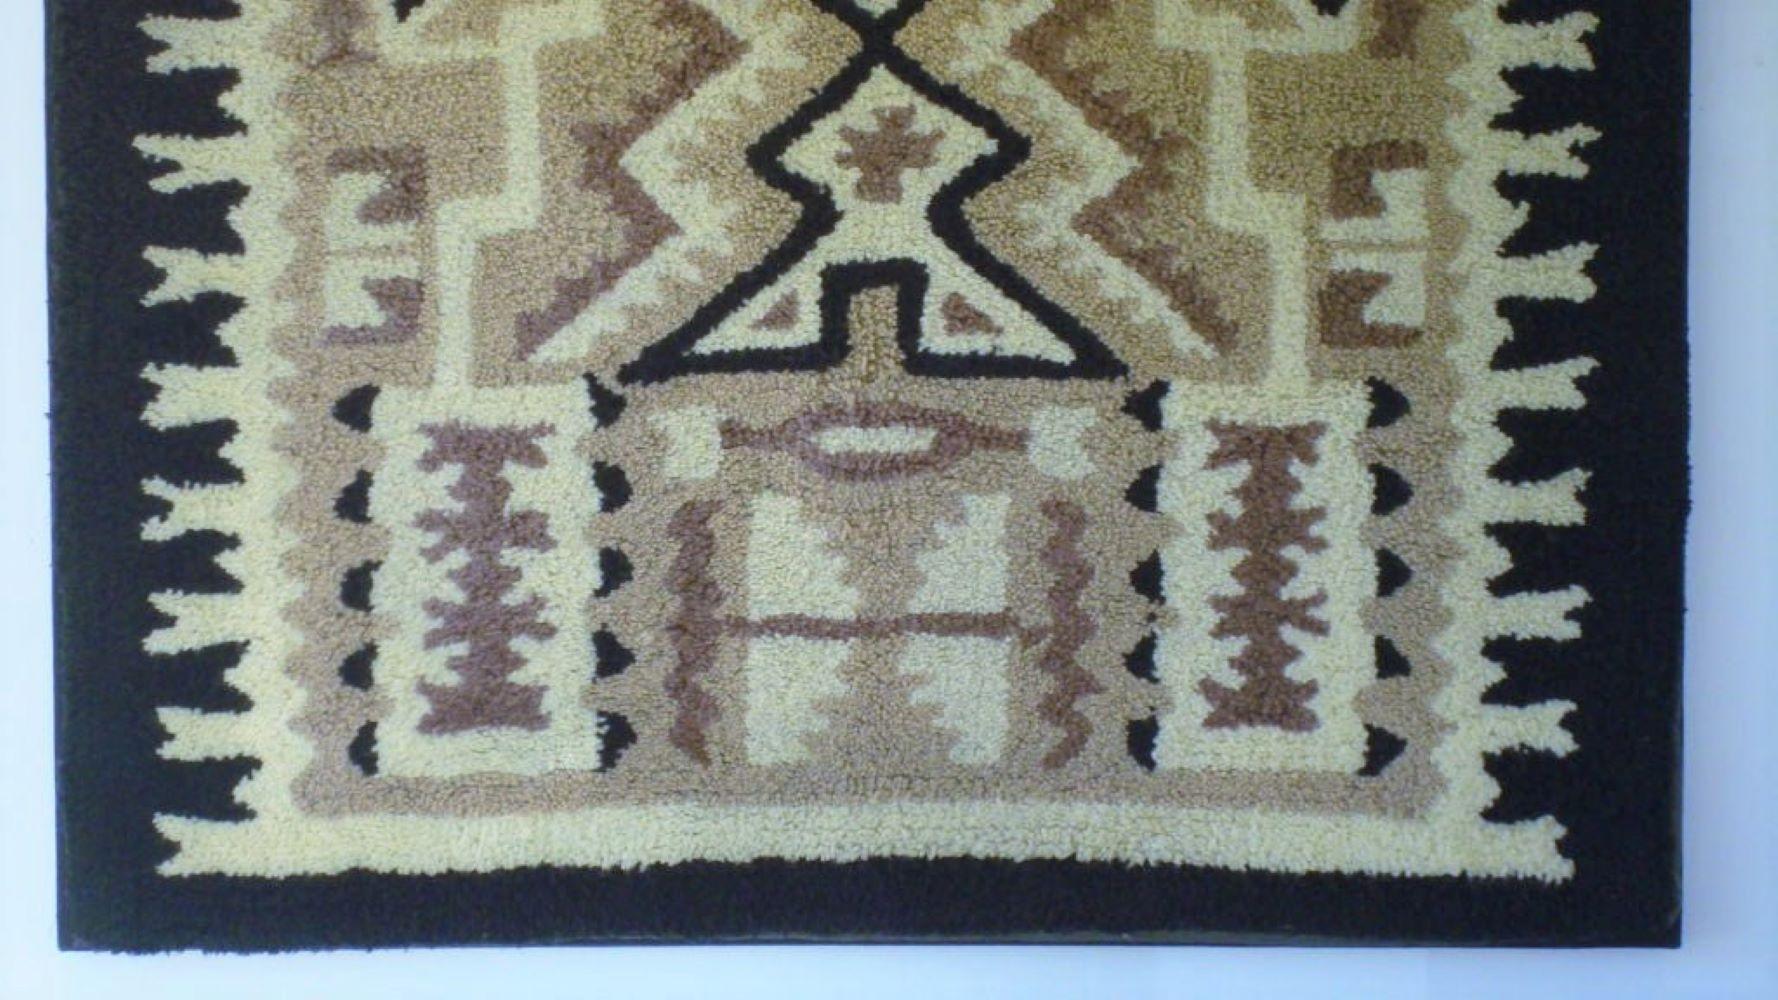 1935-1940 Mounted American Hand-Hooked Rug with Indian Pattern Design In Excellent Condition For Sale In Los Angeles, CA